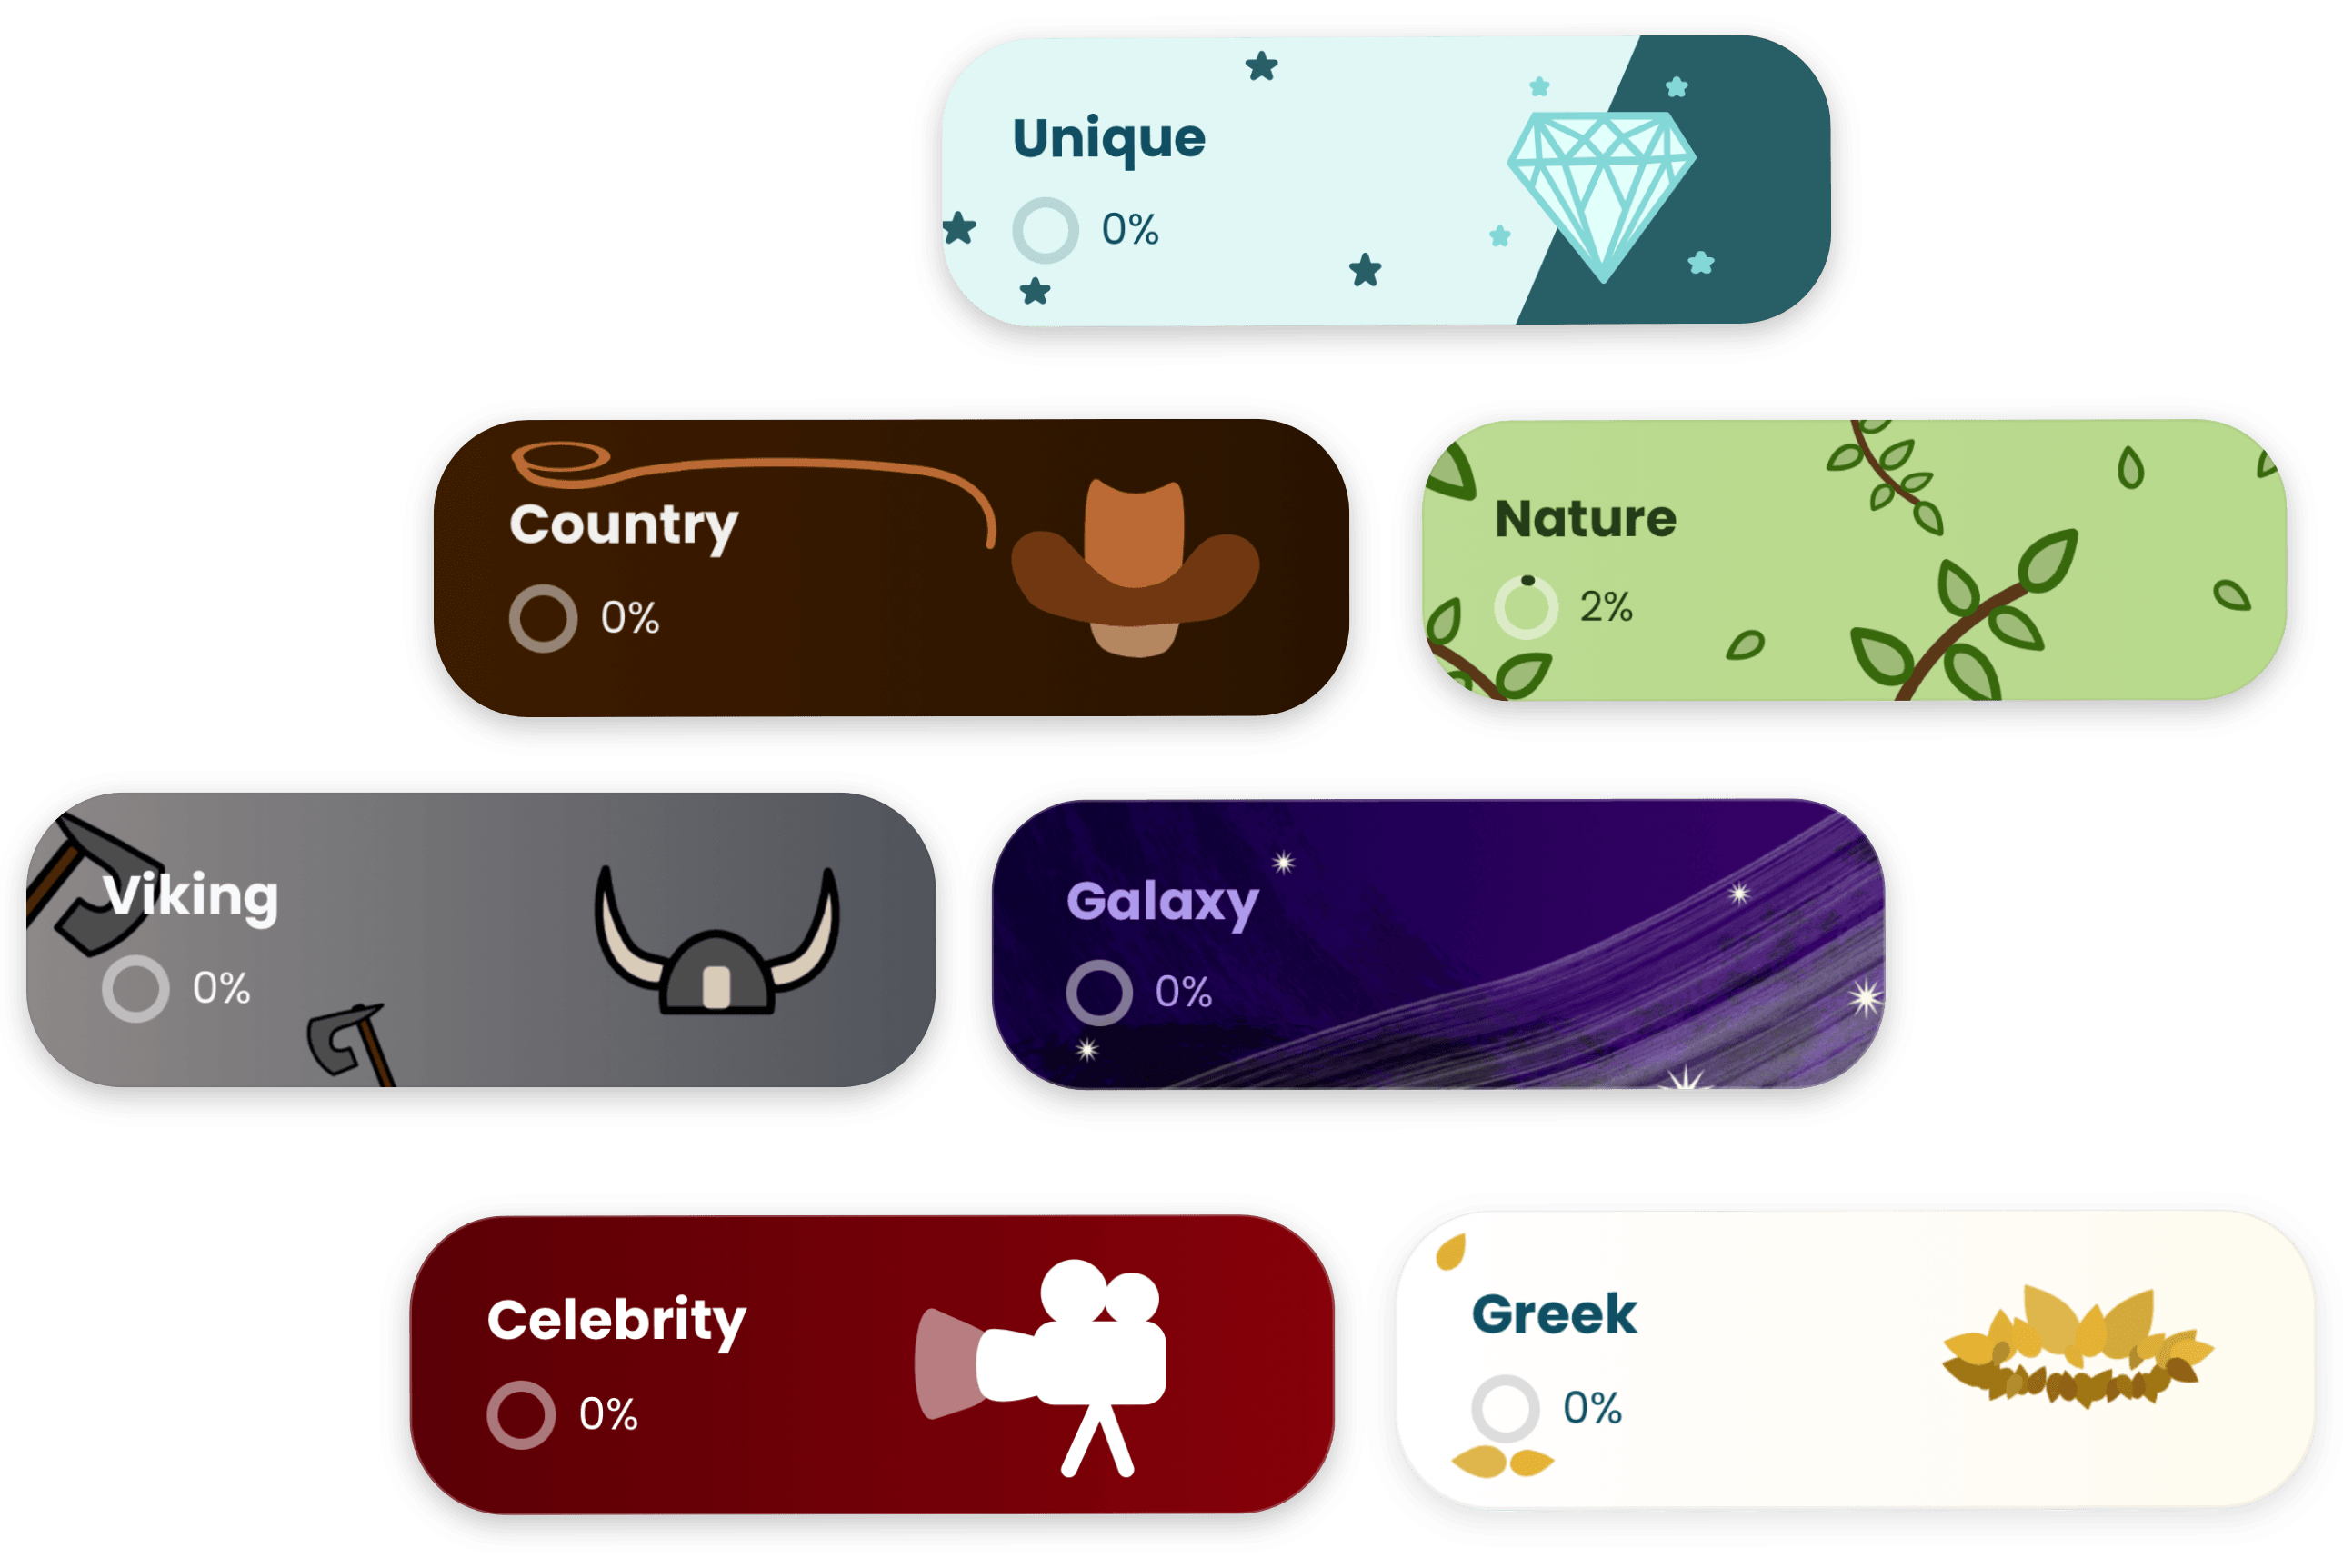 Name categories